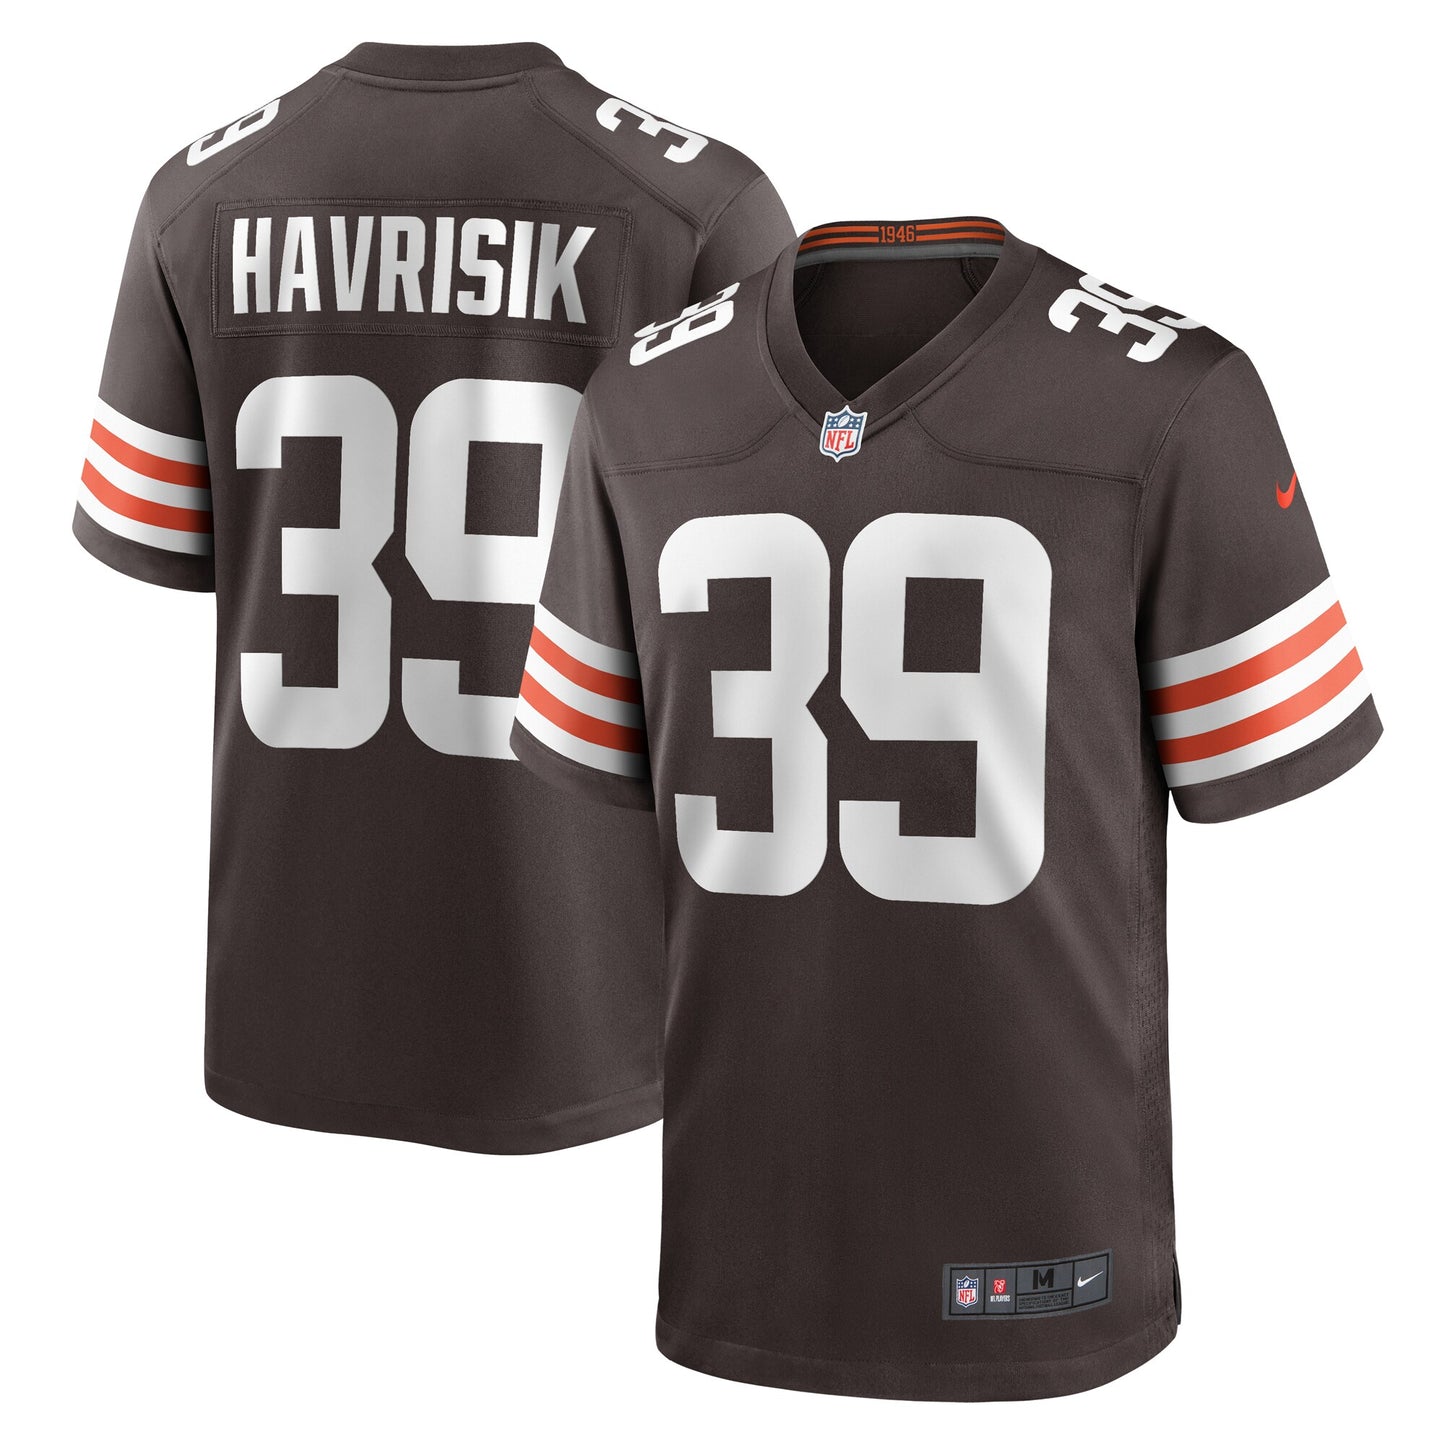 Lucas Havrisik Cleveland Browns Nike Team Game Jersey - Brown